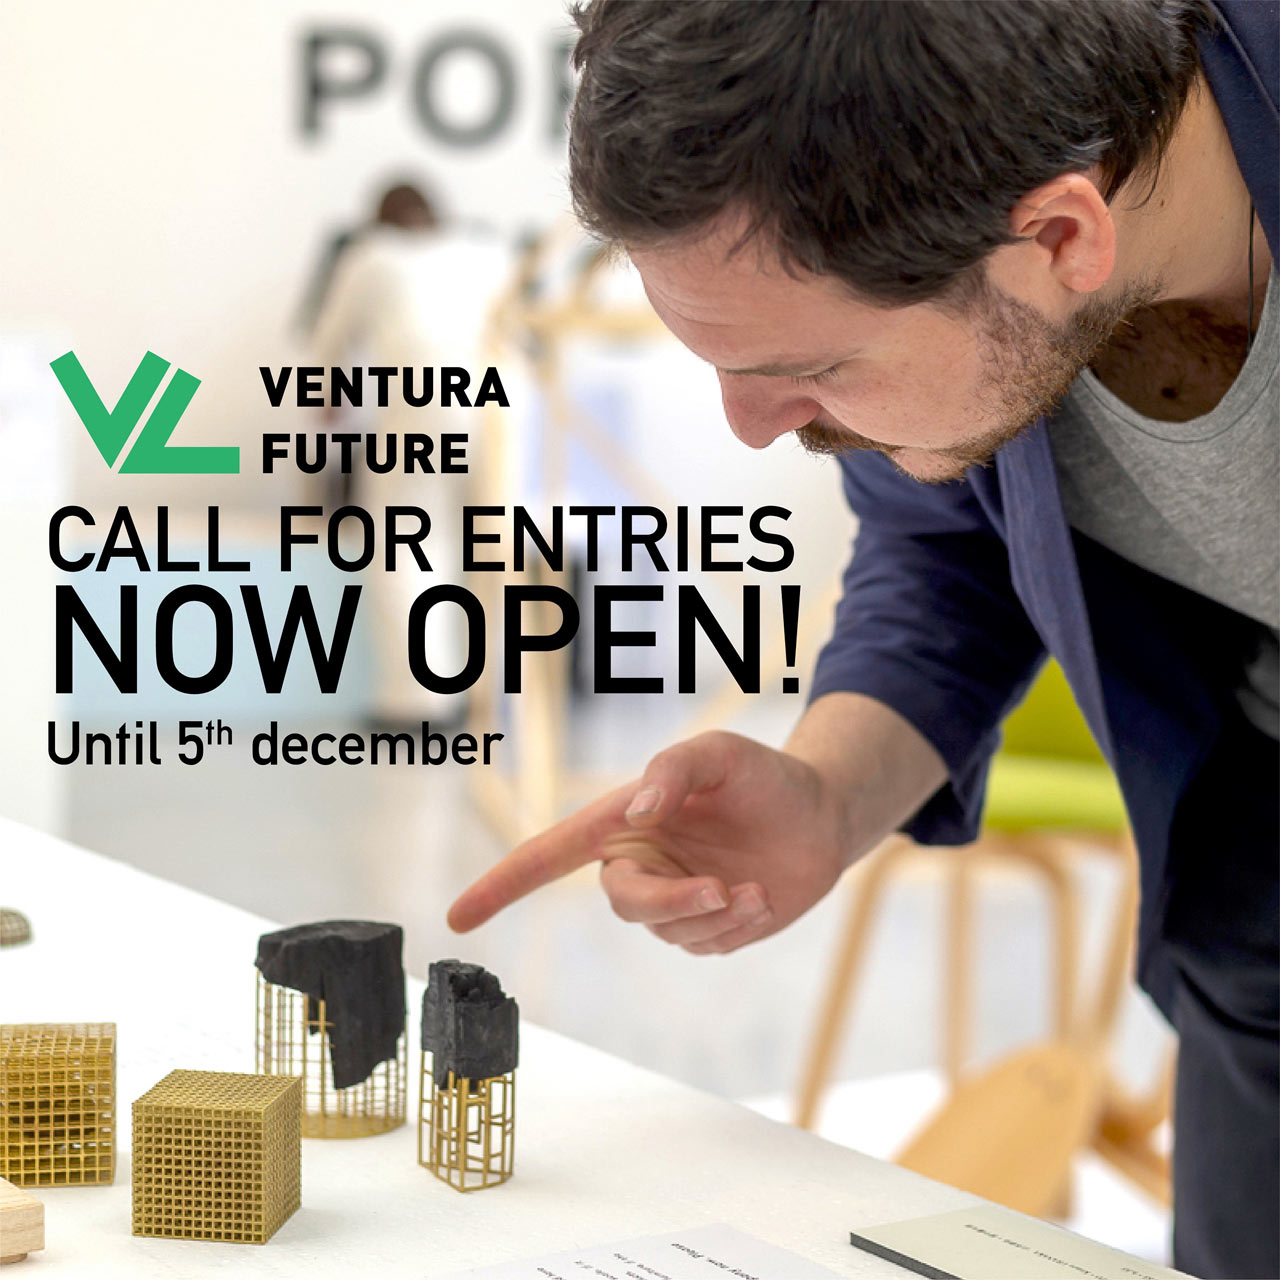 Apply for the 2019 Ventura Future in Milan